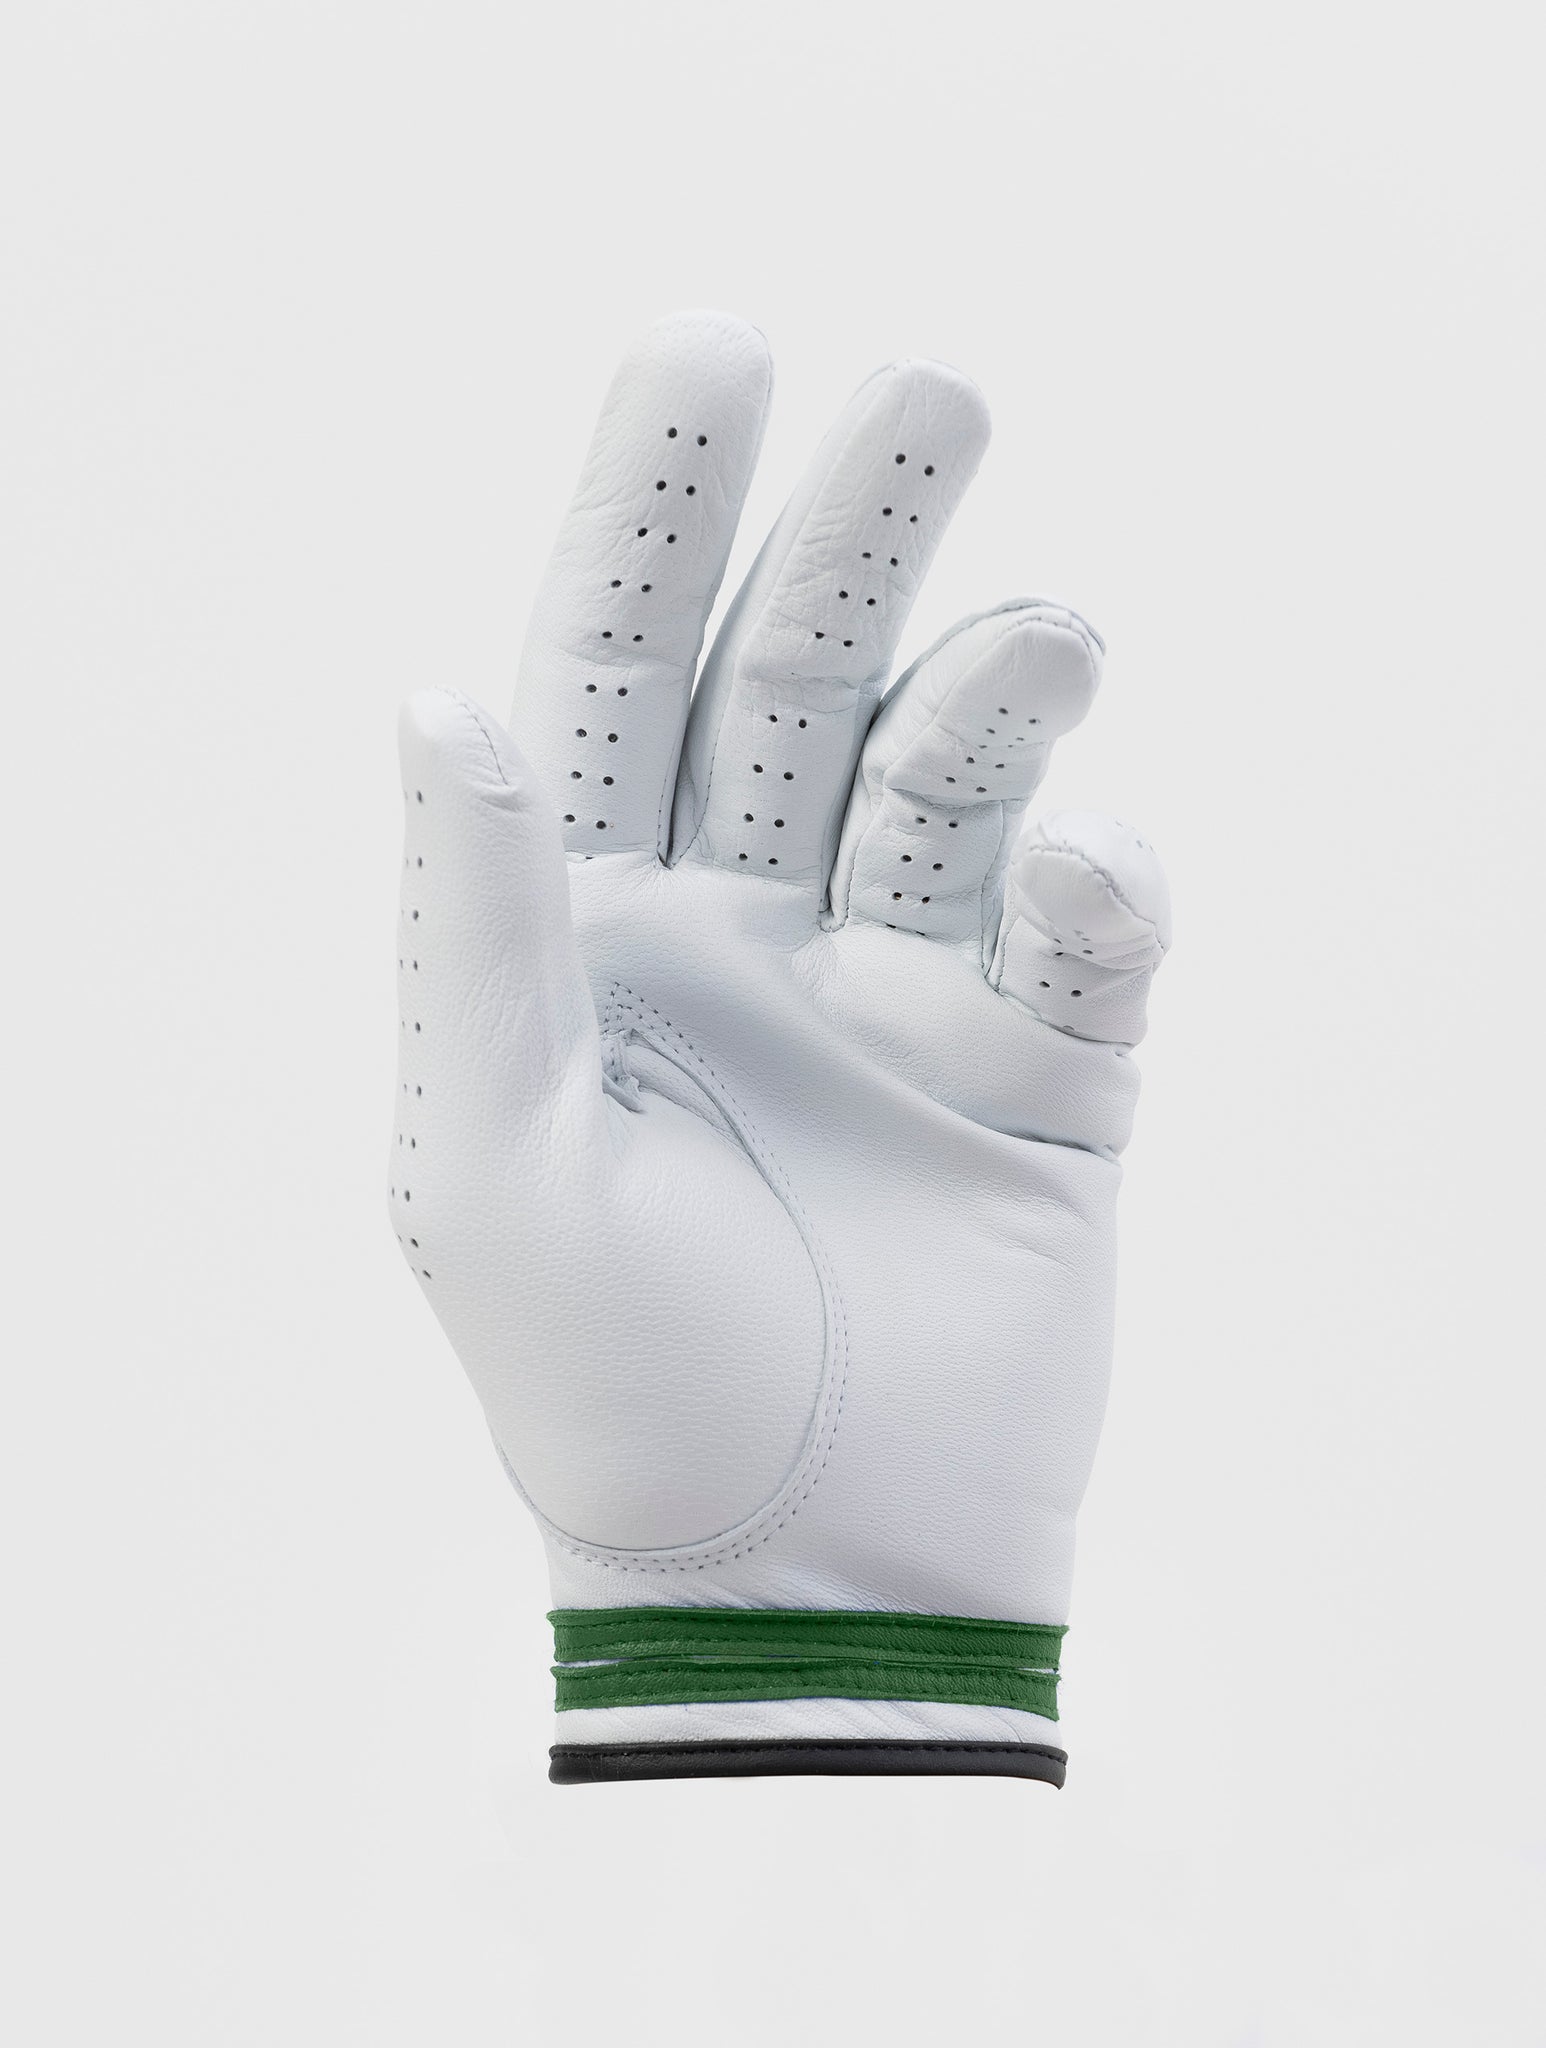 NOHOW GOLF LEFT GLOVE IN WHITE AND GREEN